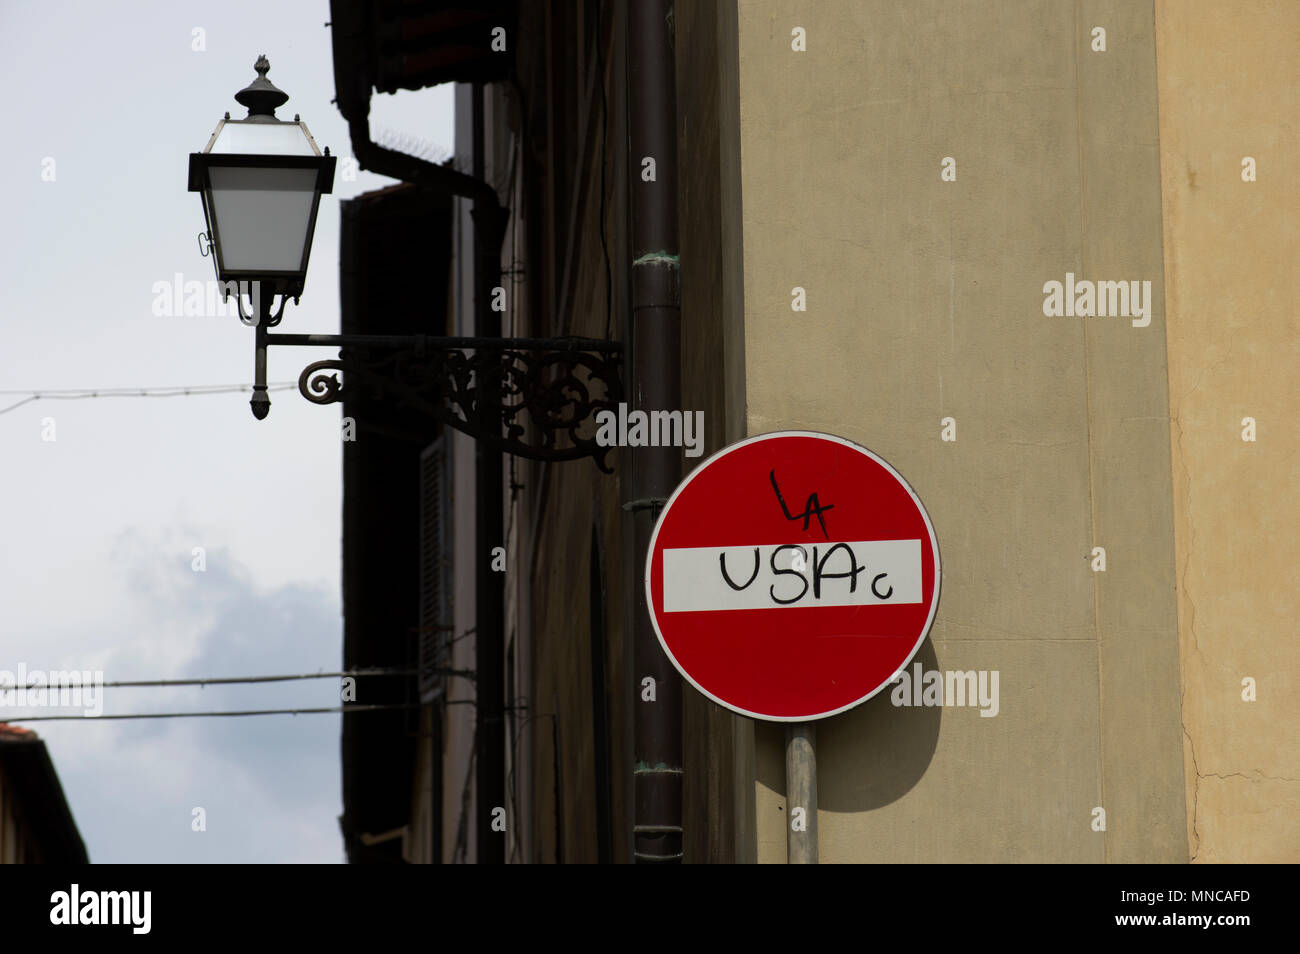 Spray painted grafitti on a street sign in spanish or italian indicating stop the USA or block the USA or dead end no entry to the USA Stock Photo